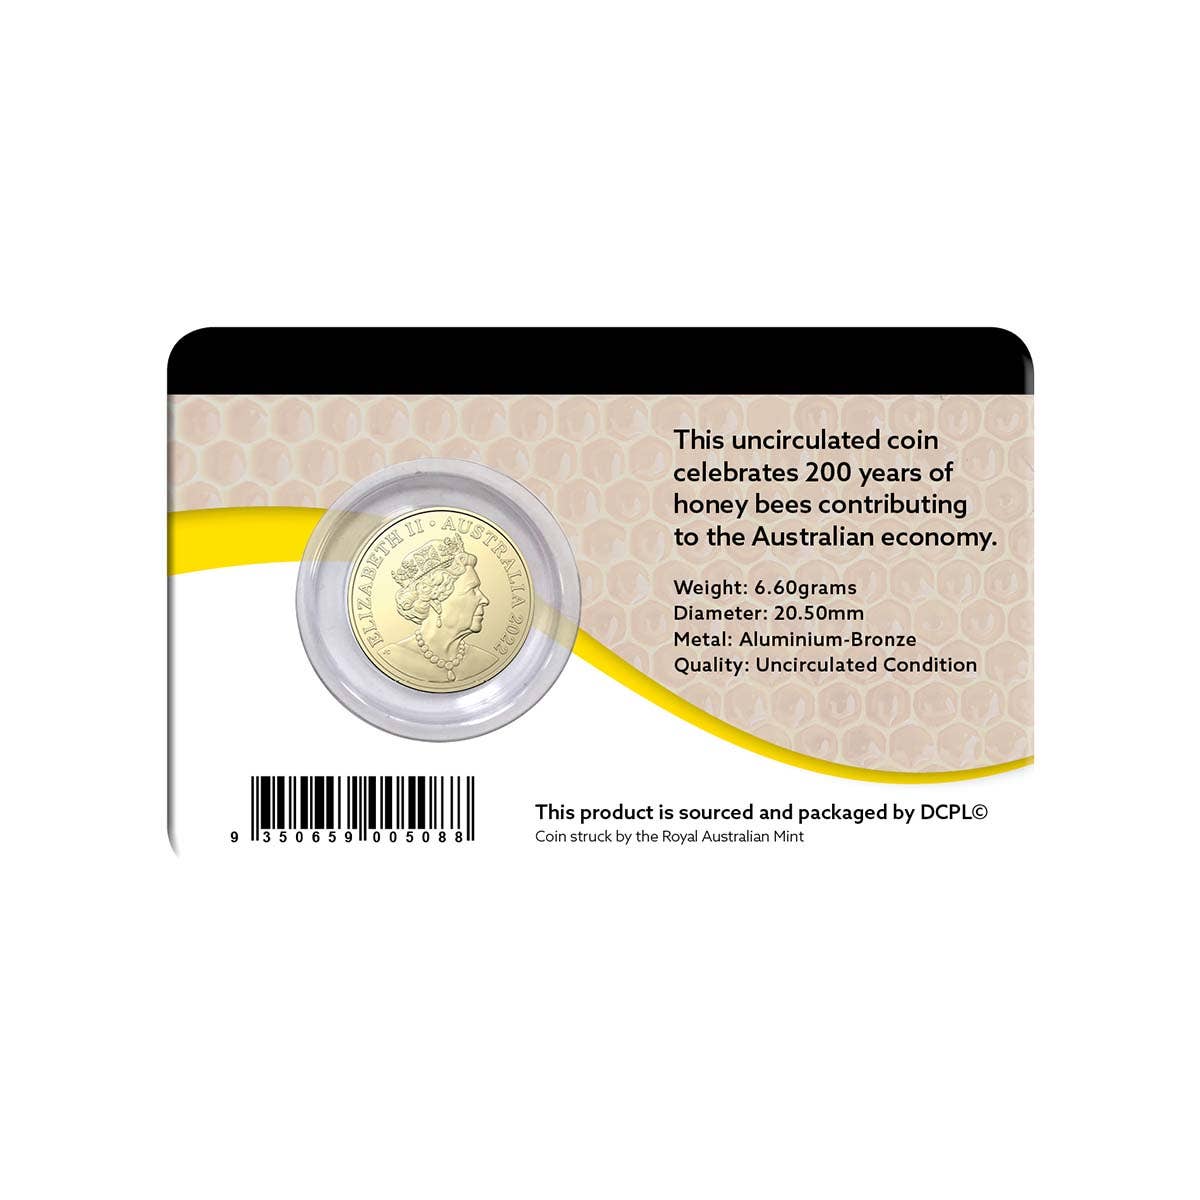 Honey Bee 2022 $2 Coloured Coin AlBr Pack